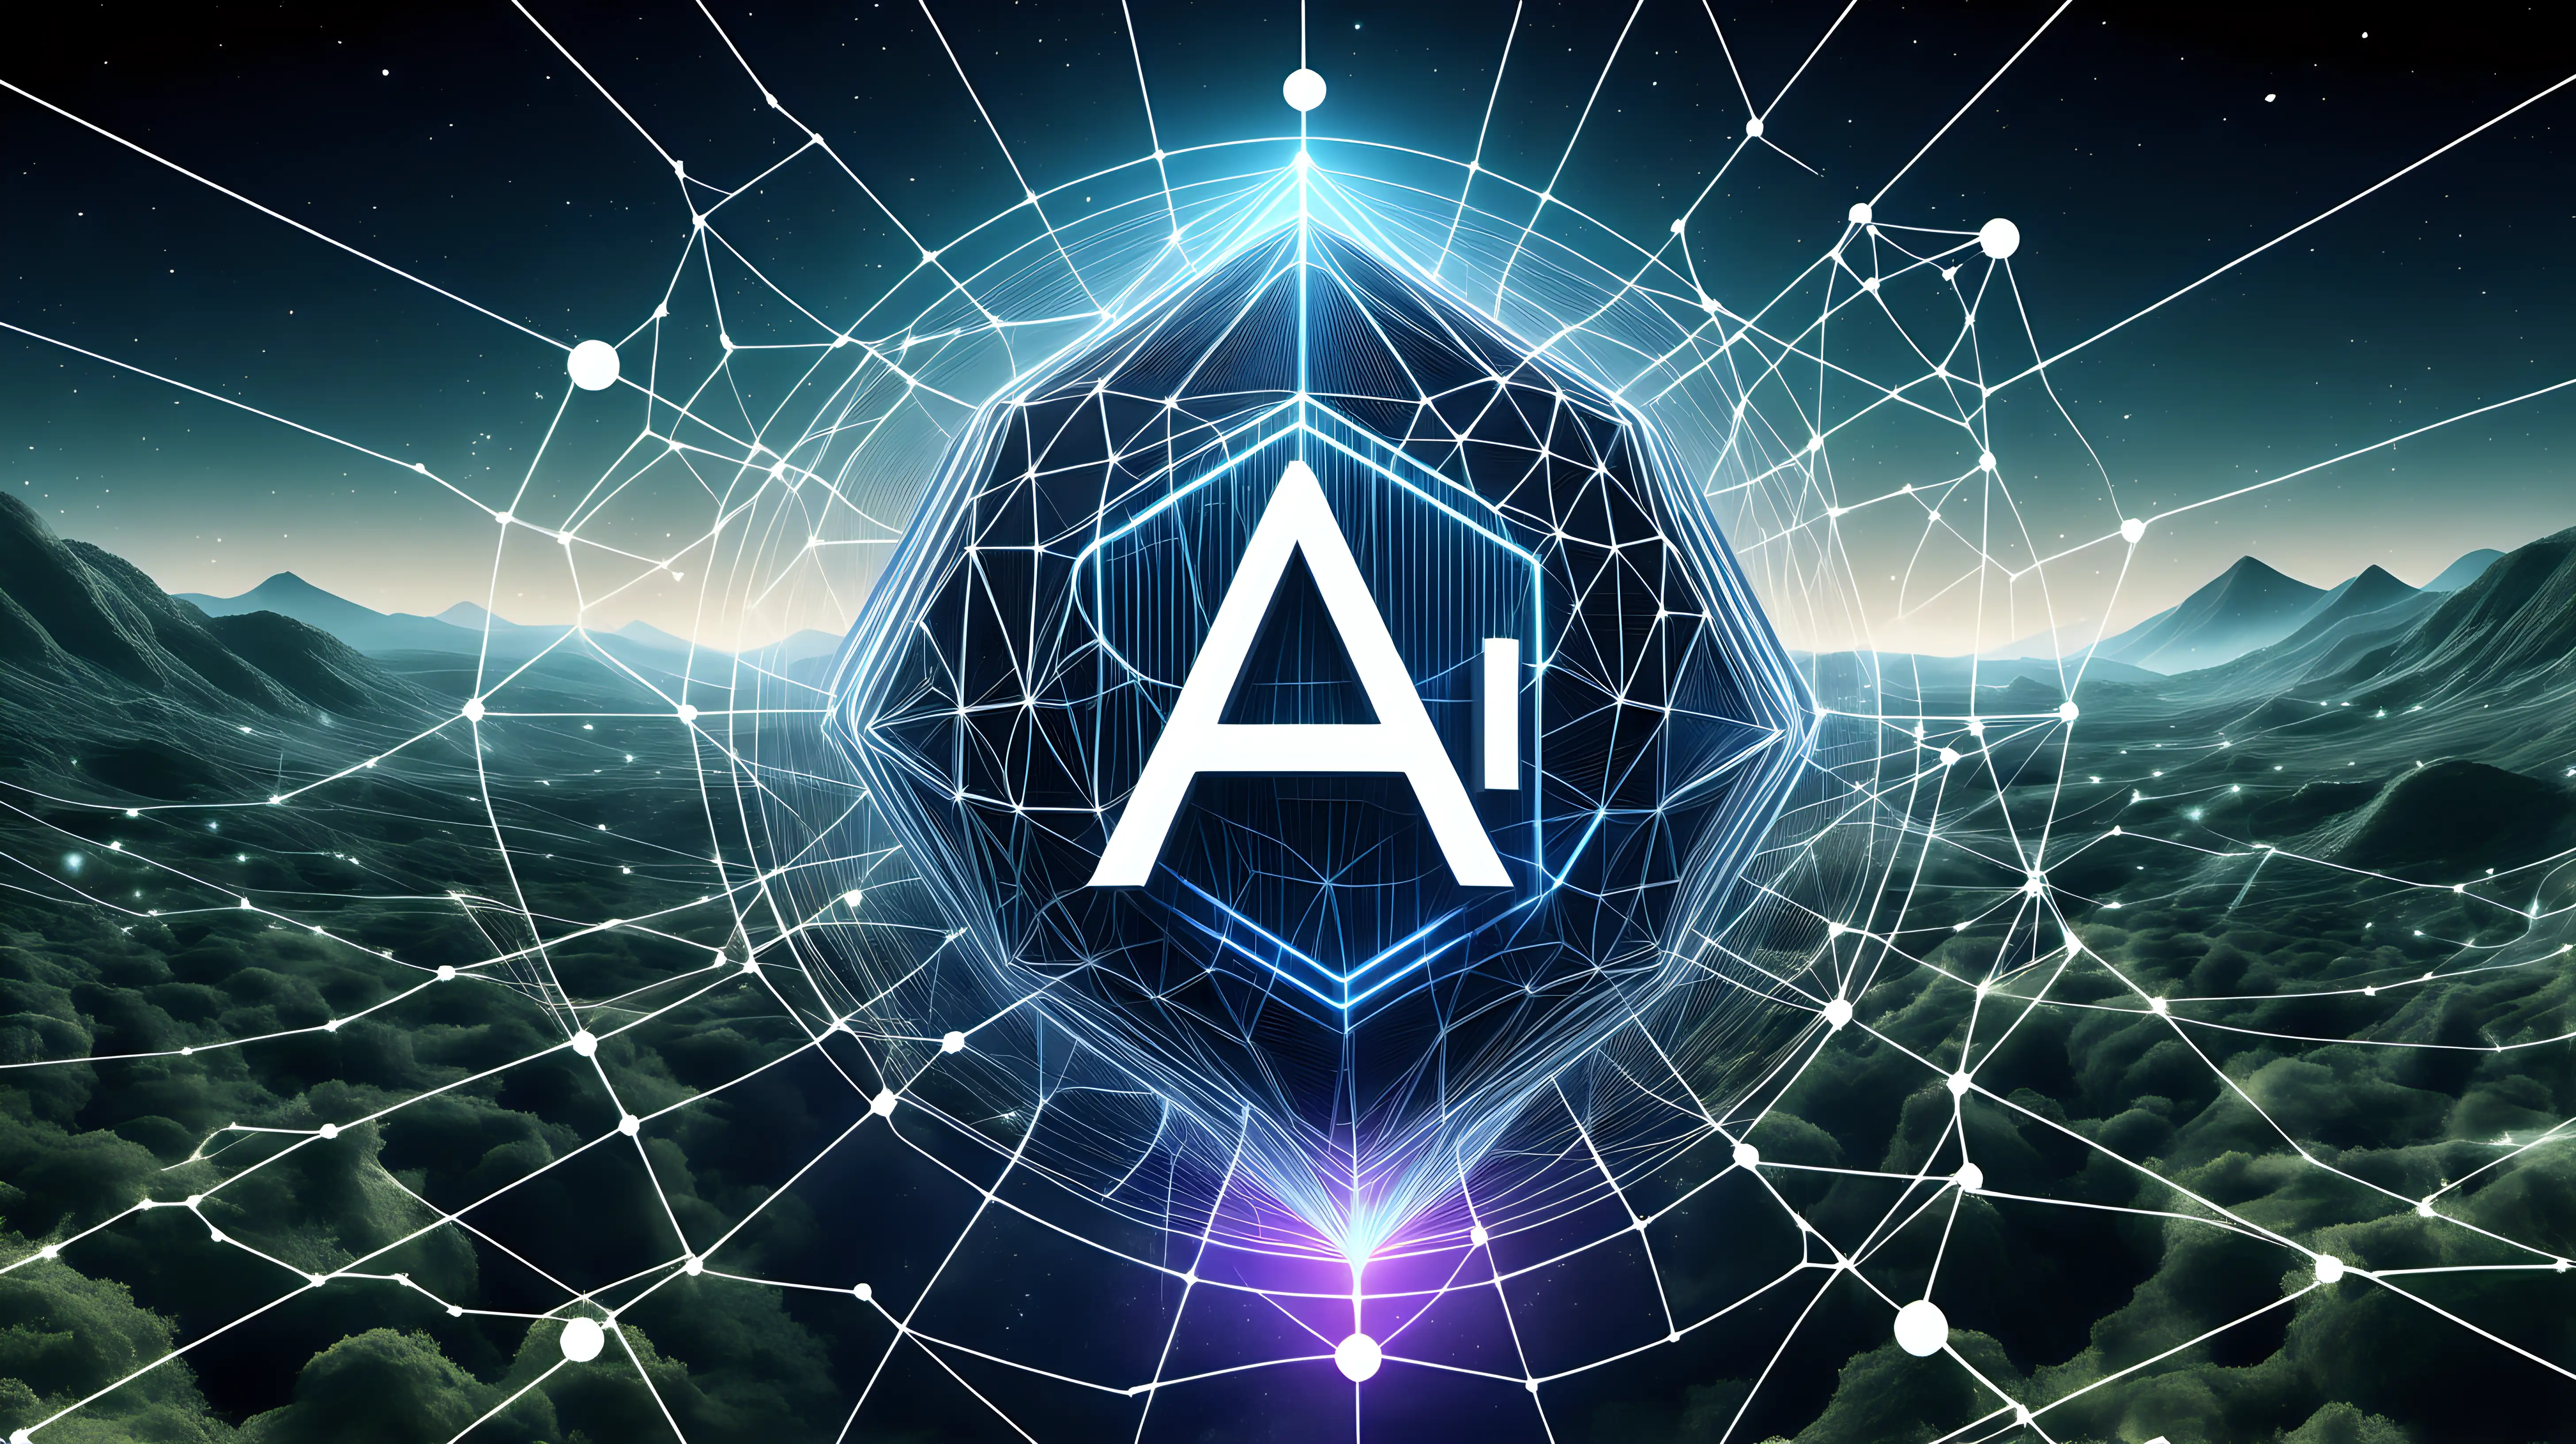 A cutting-edge visual representation of AI technology, featuring the central "AI" emblem surrounded by a futuristic landscape of interconnected nodes, data streams, and dynamic energy waves.